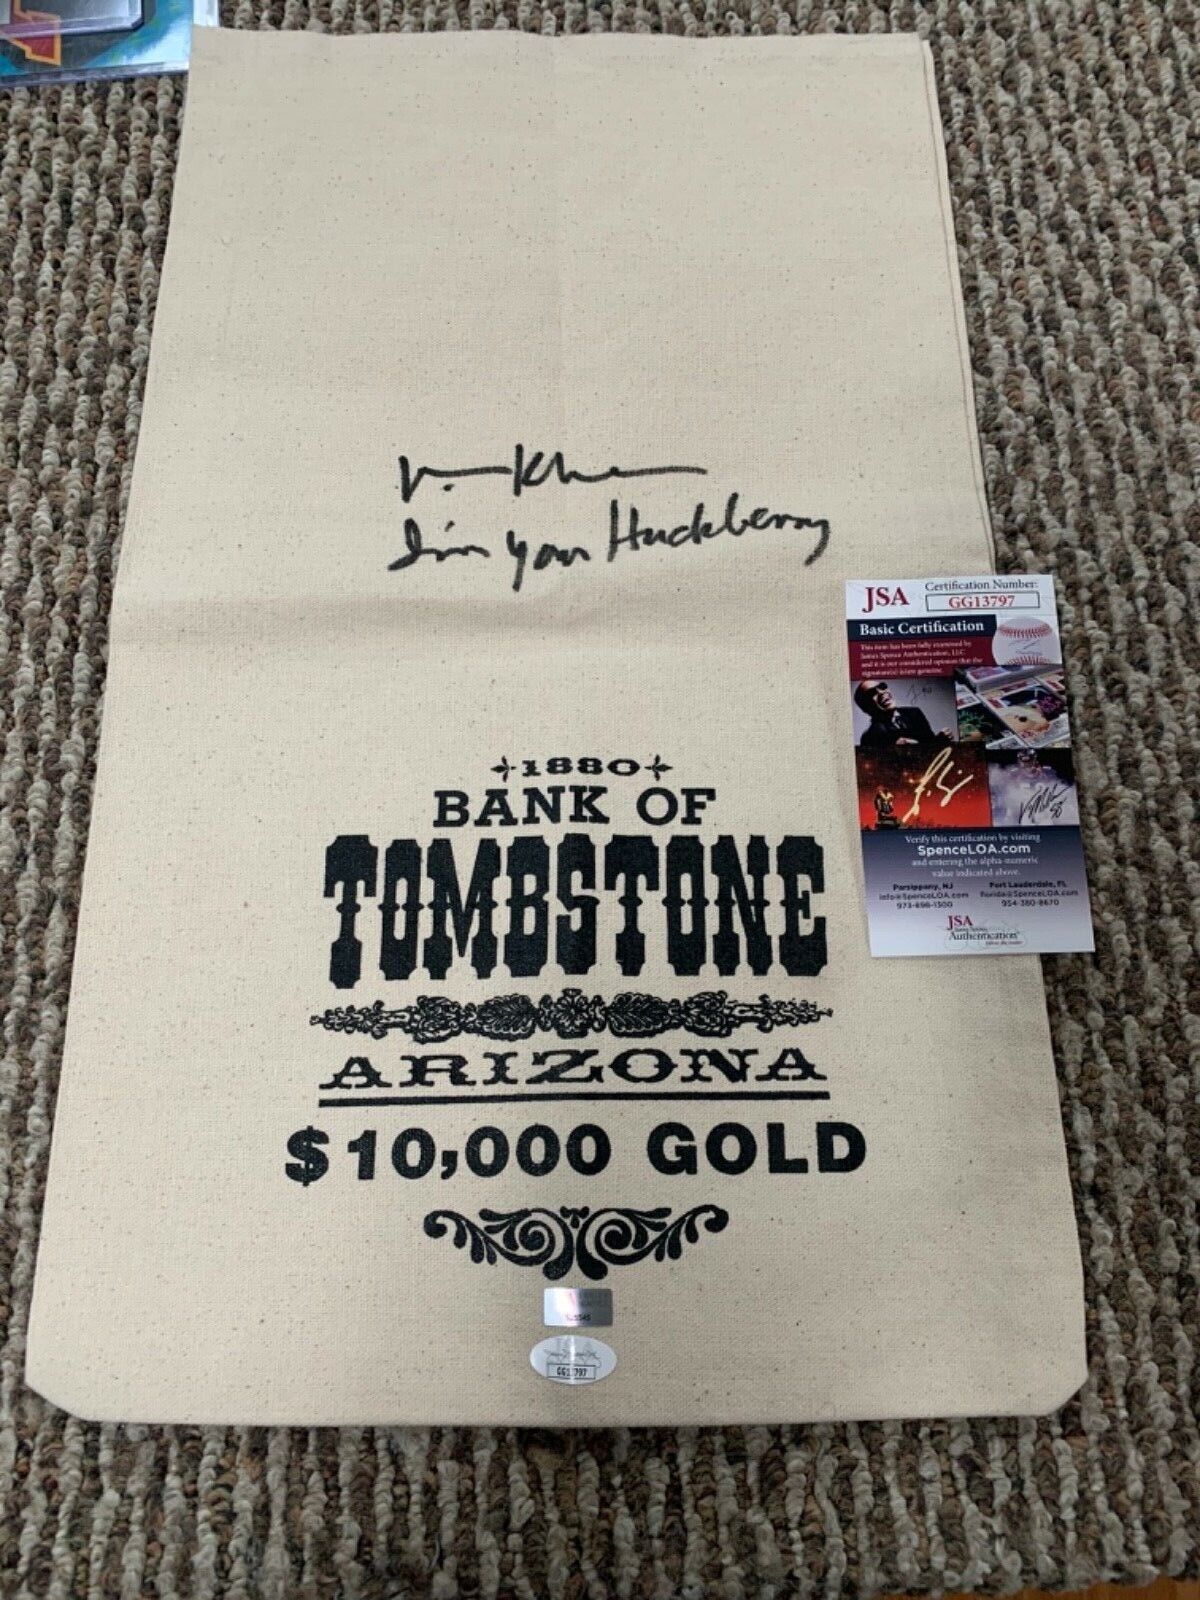 Val Kilmer Doc Holliday Signed Replica Bag Tombstone Actor JSA with Quote